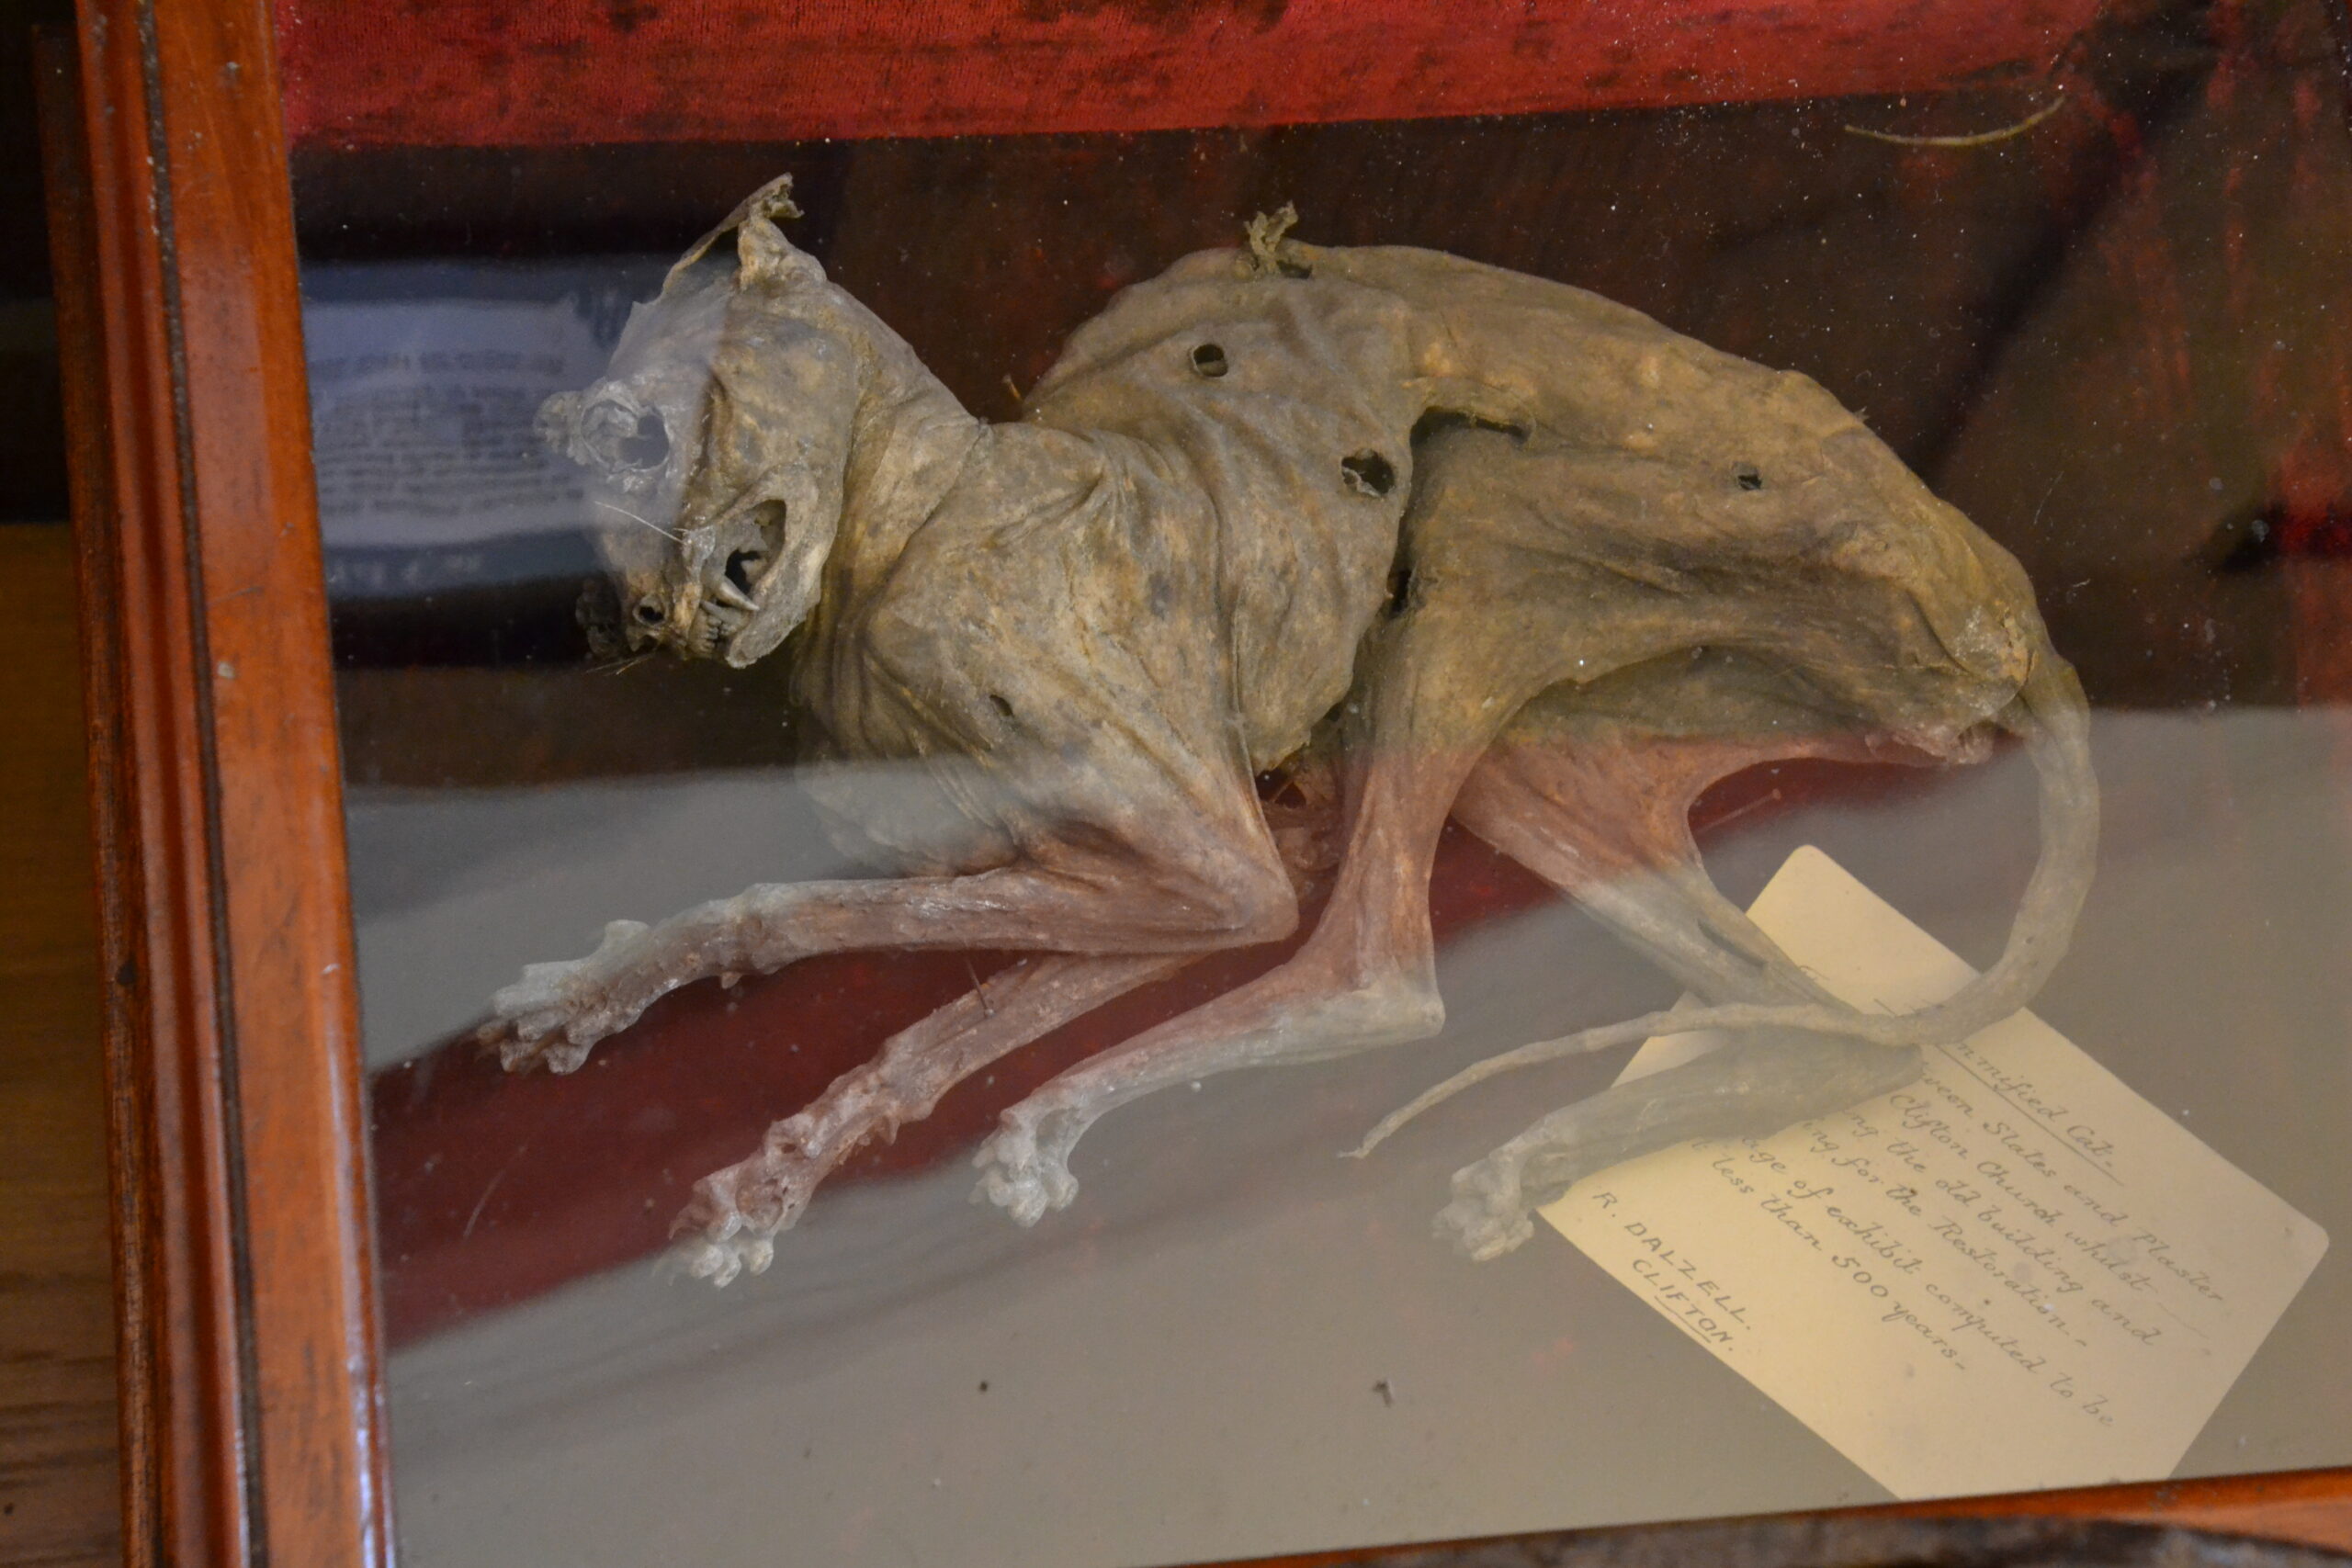 Mummified cat found in the roof space of a church in Clifton, Cumbria. Photograph by J. Neild, copyright Keswick Museum (please contact Keswick Museum curator to reproduce image)